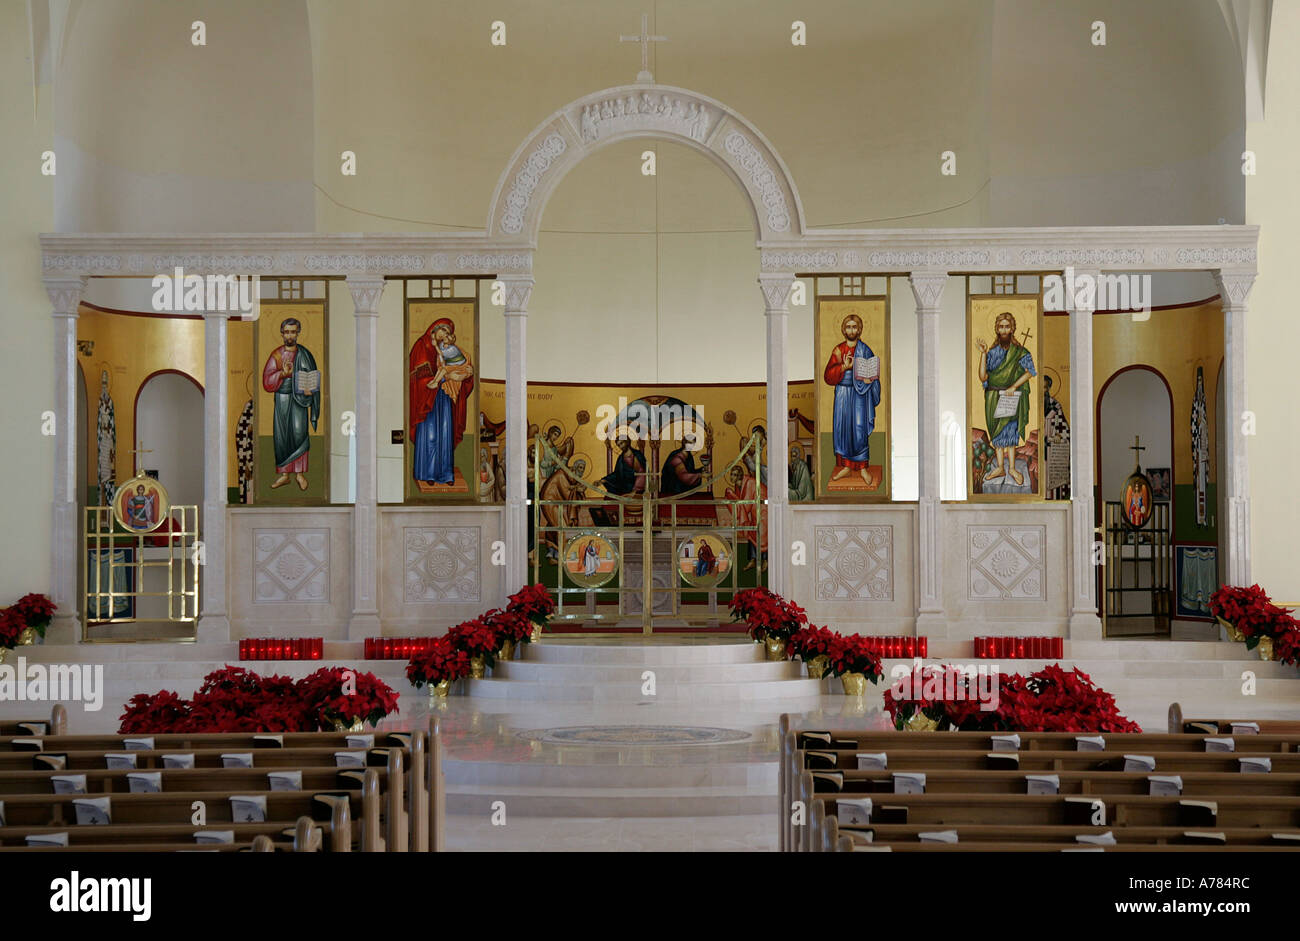 Greek orthodox Christian church Boca Raton Florida cathedral of the assumption pray heritage historical ancient people religion Stock Photo